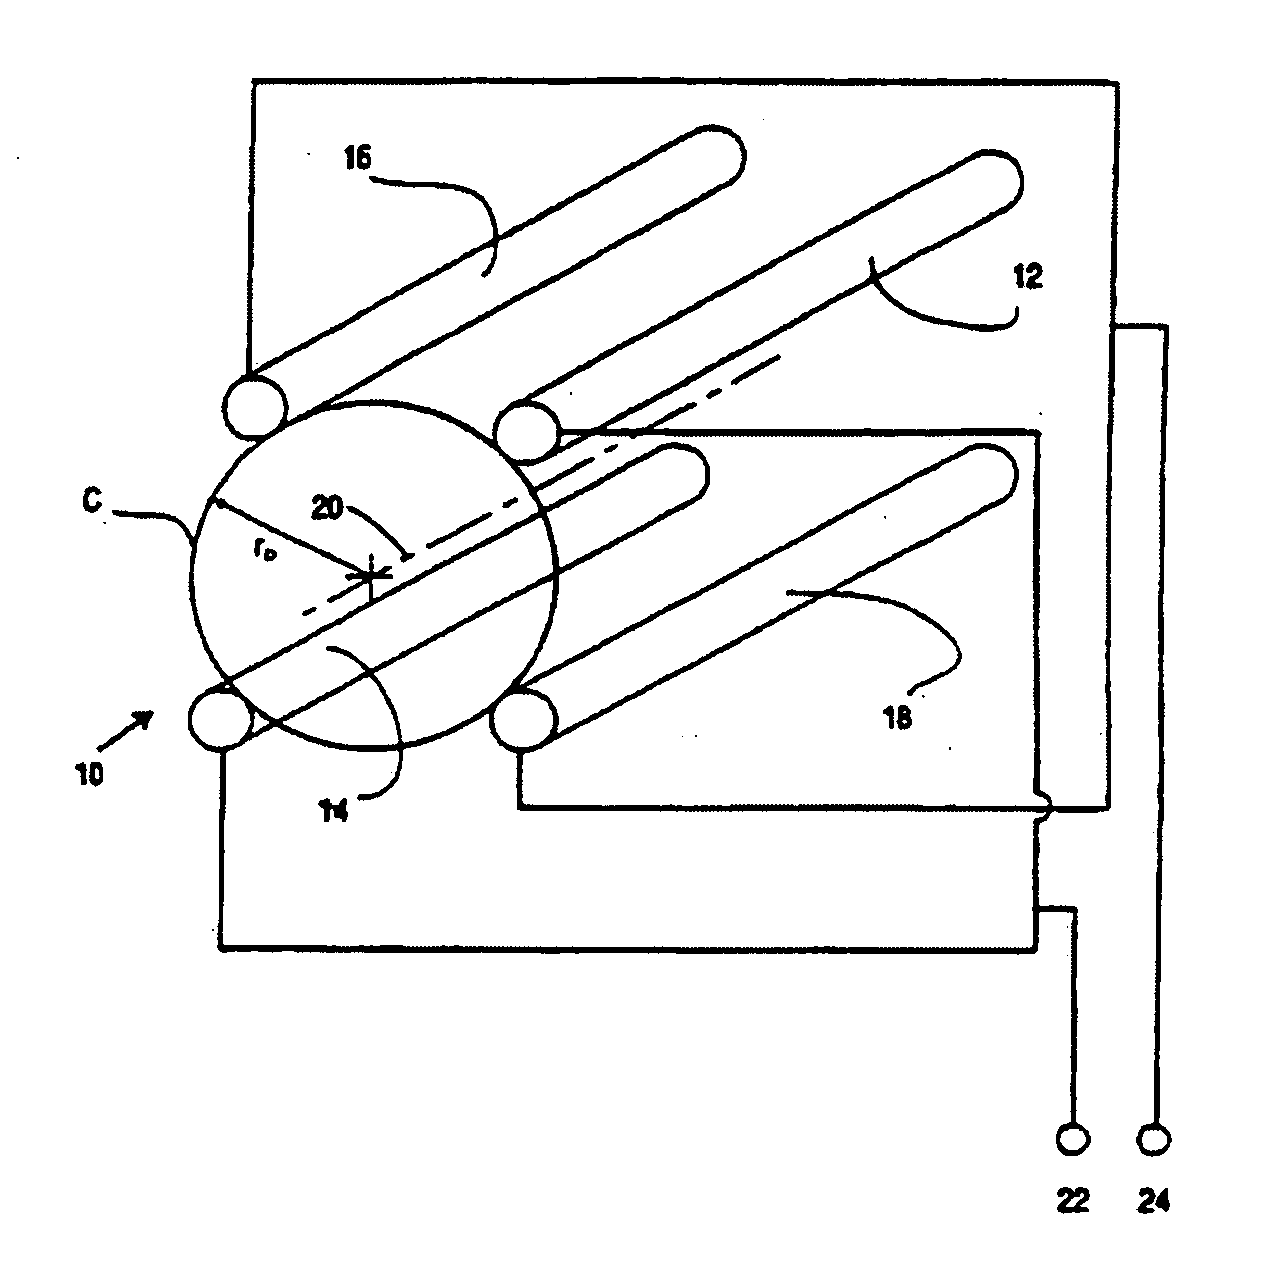 Method and apparatus for providing two-dimensional substantially quadrupole fields having selected hexapole components